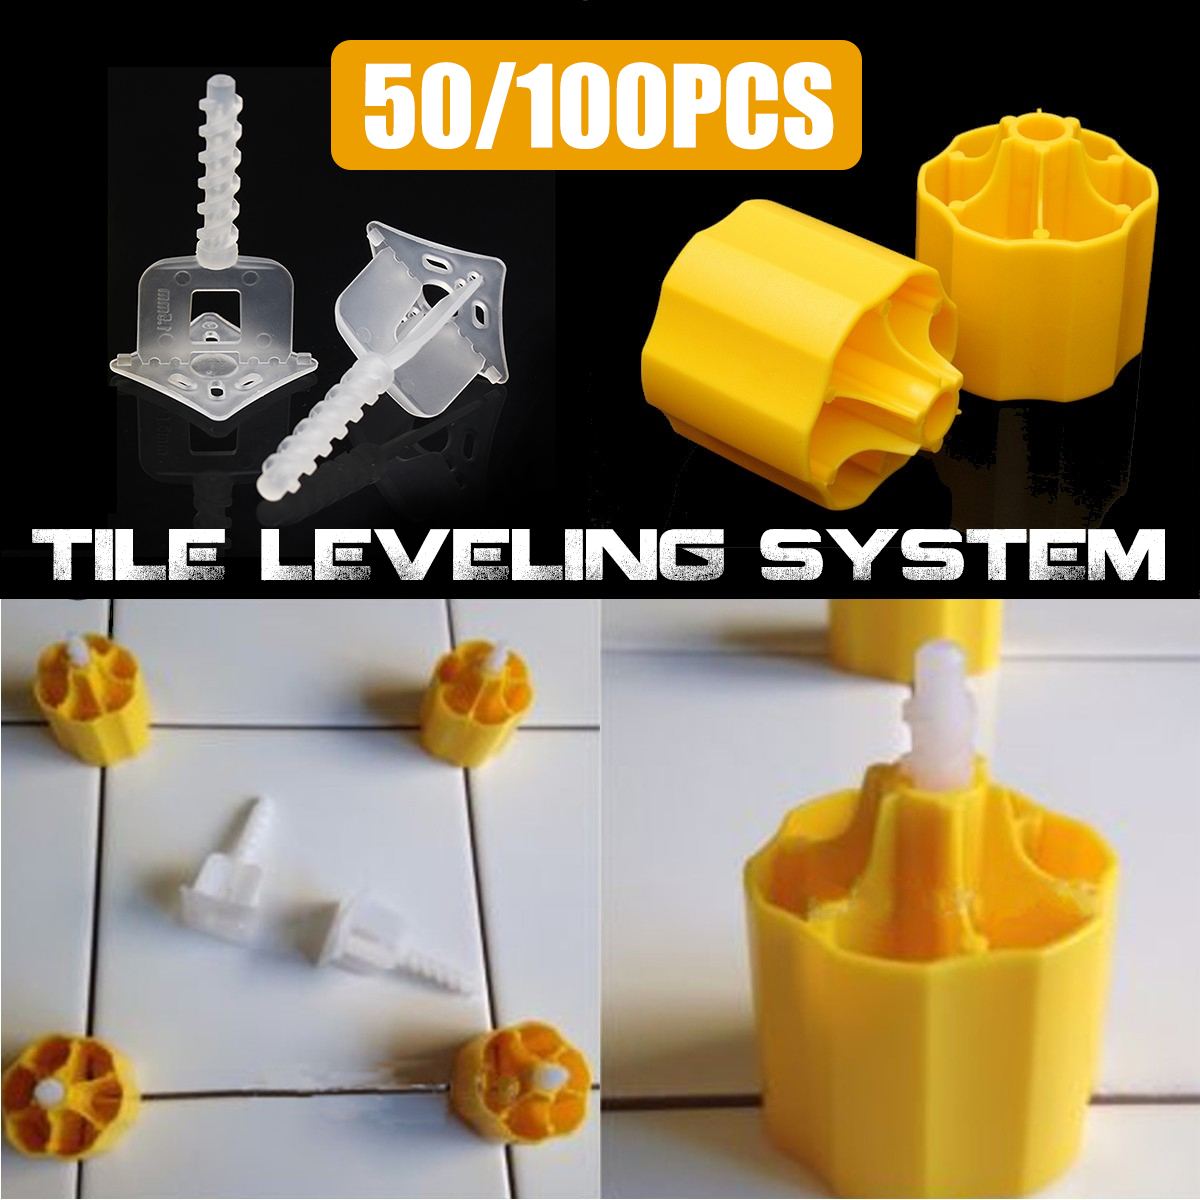 100Pcs-Reusable-Tile-Leveling-System-Levelers-Caps-Spacers-Wall-Floors-Tools-1844043-1